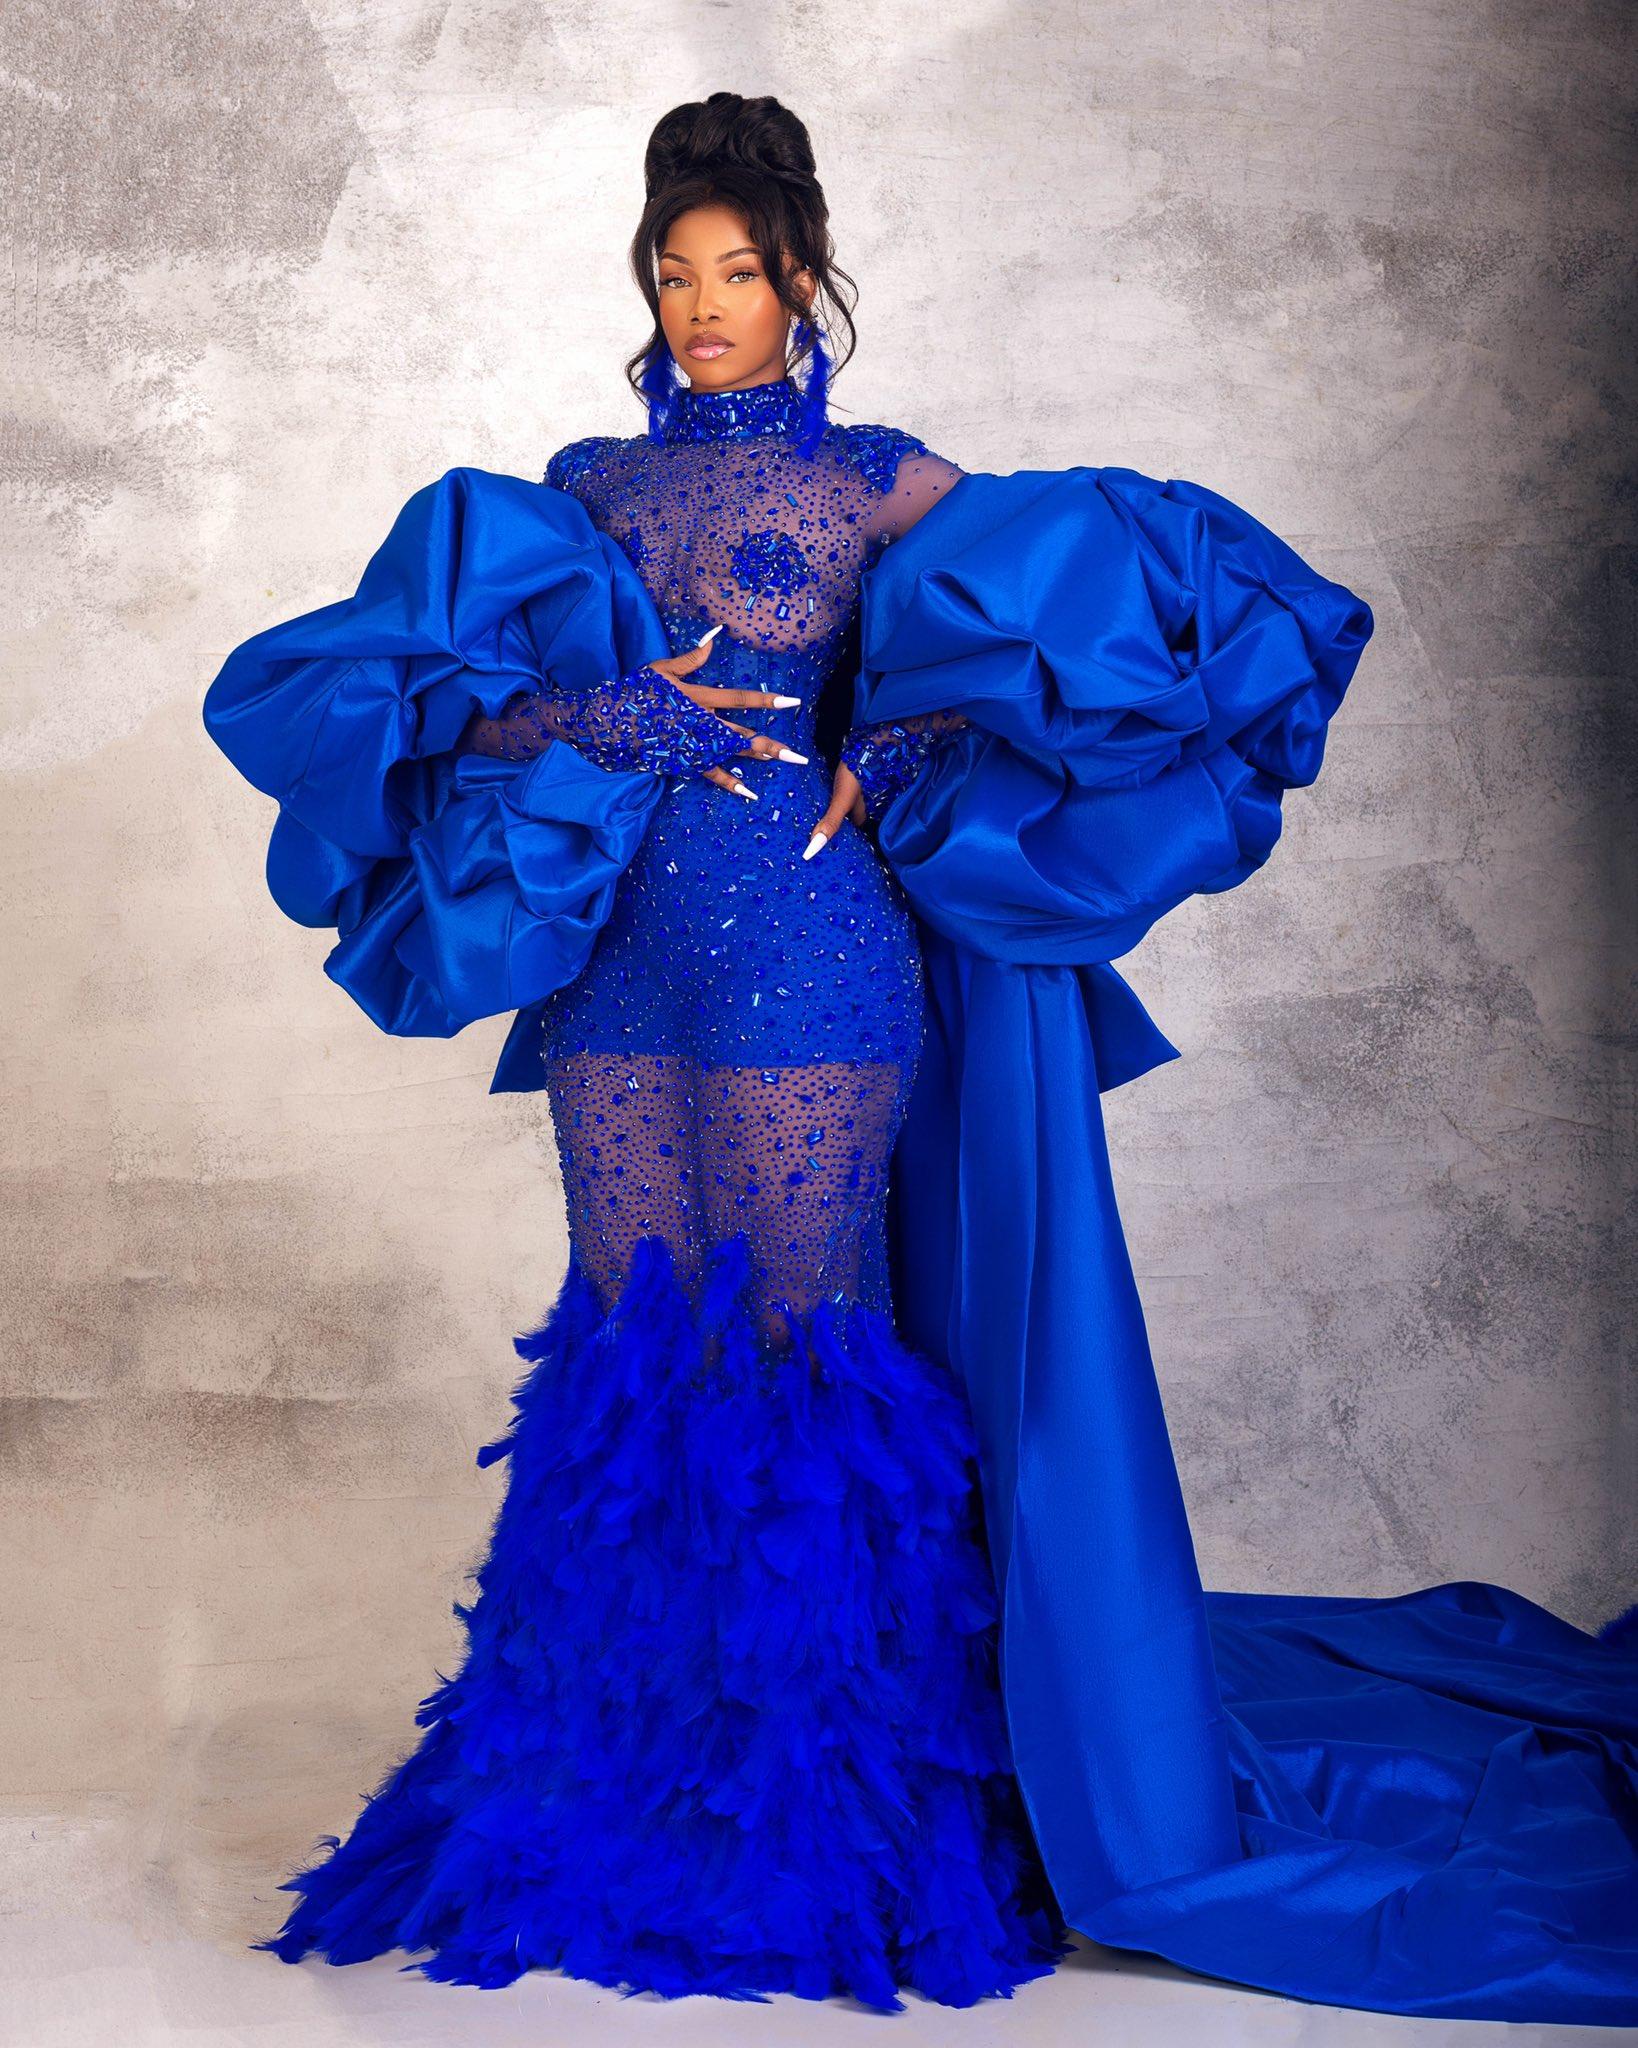 Tacha's $20k outfit to the 2023 AMVCA